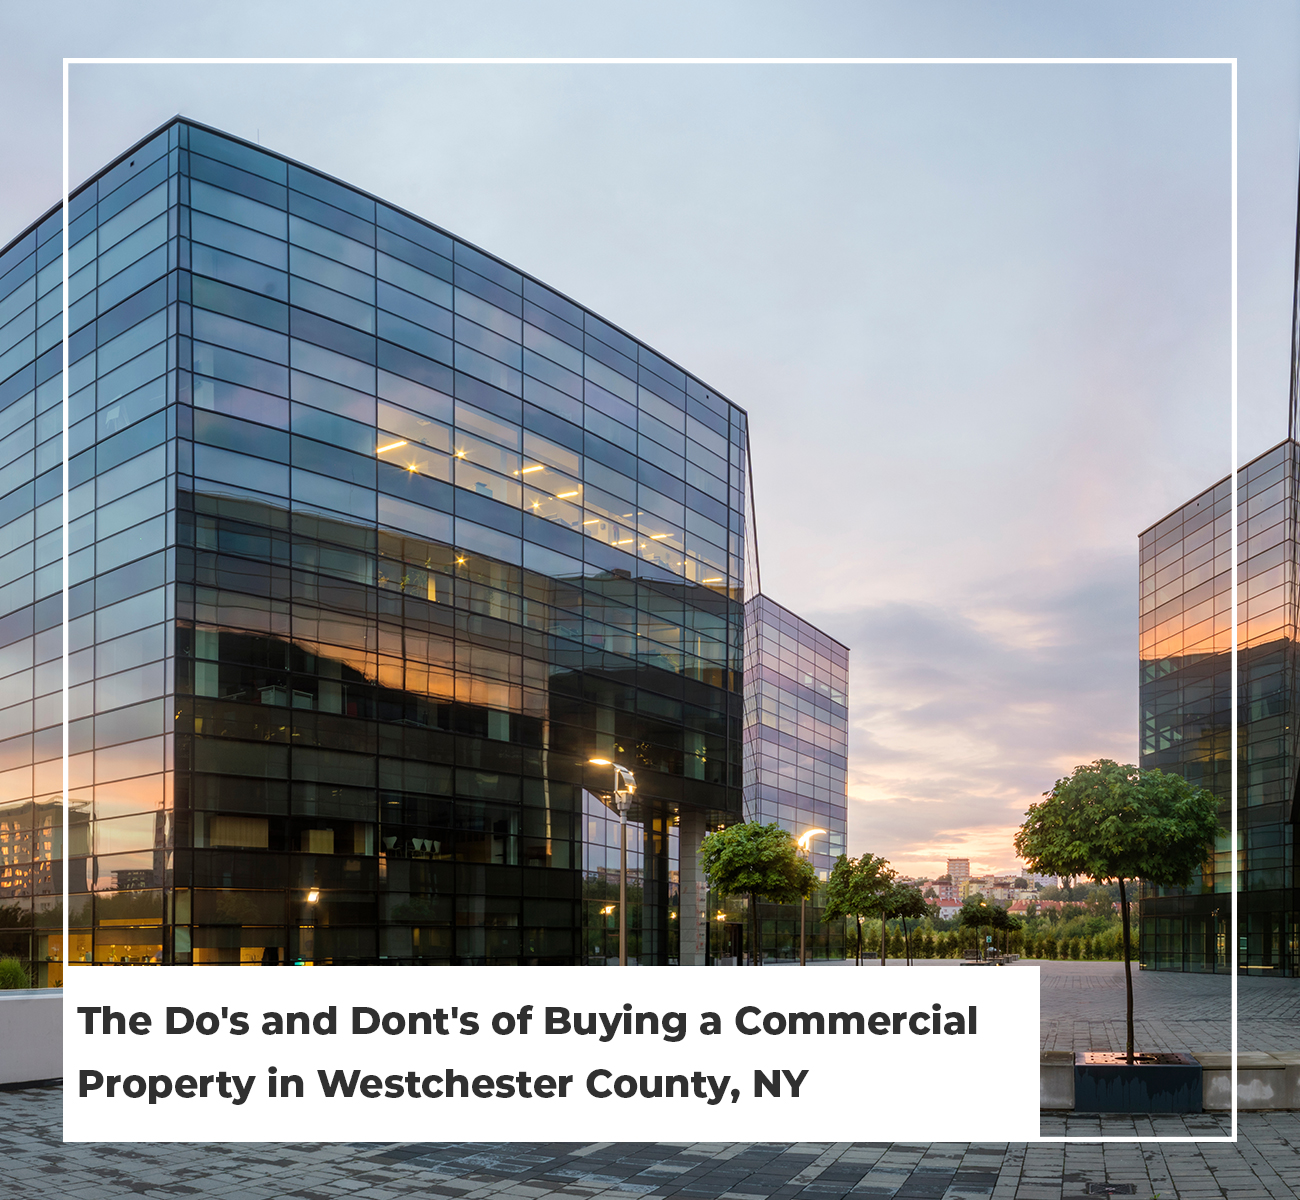 The Do's and Dont's of Buying a Commercial Property in Westchester County, NY